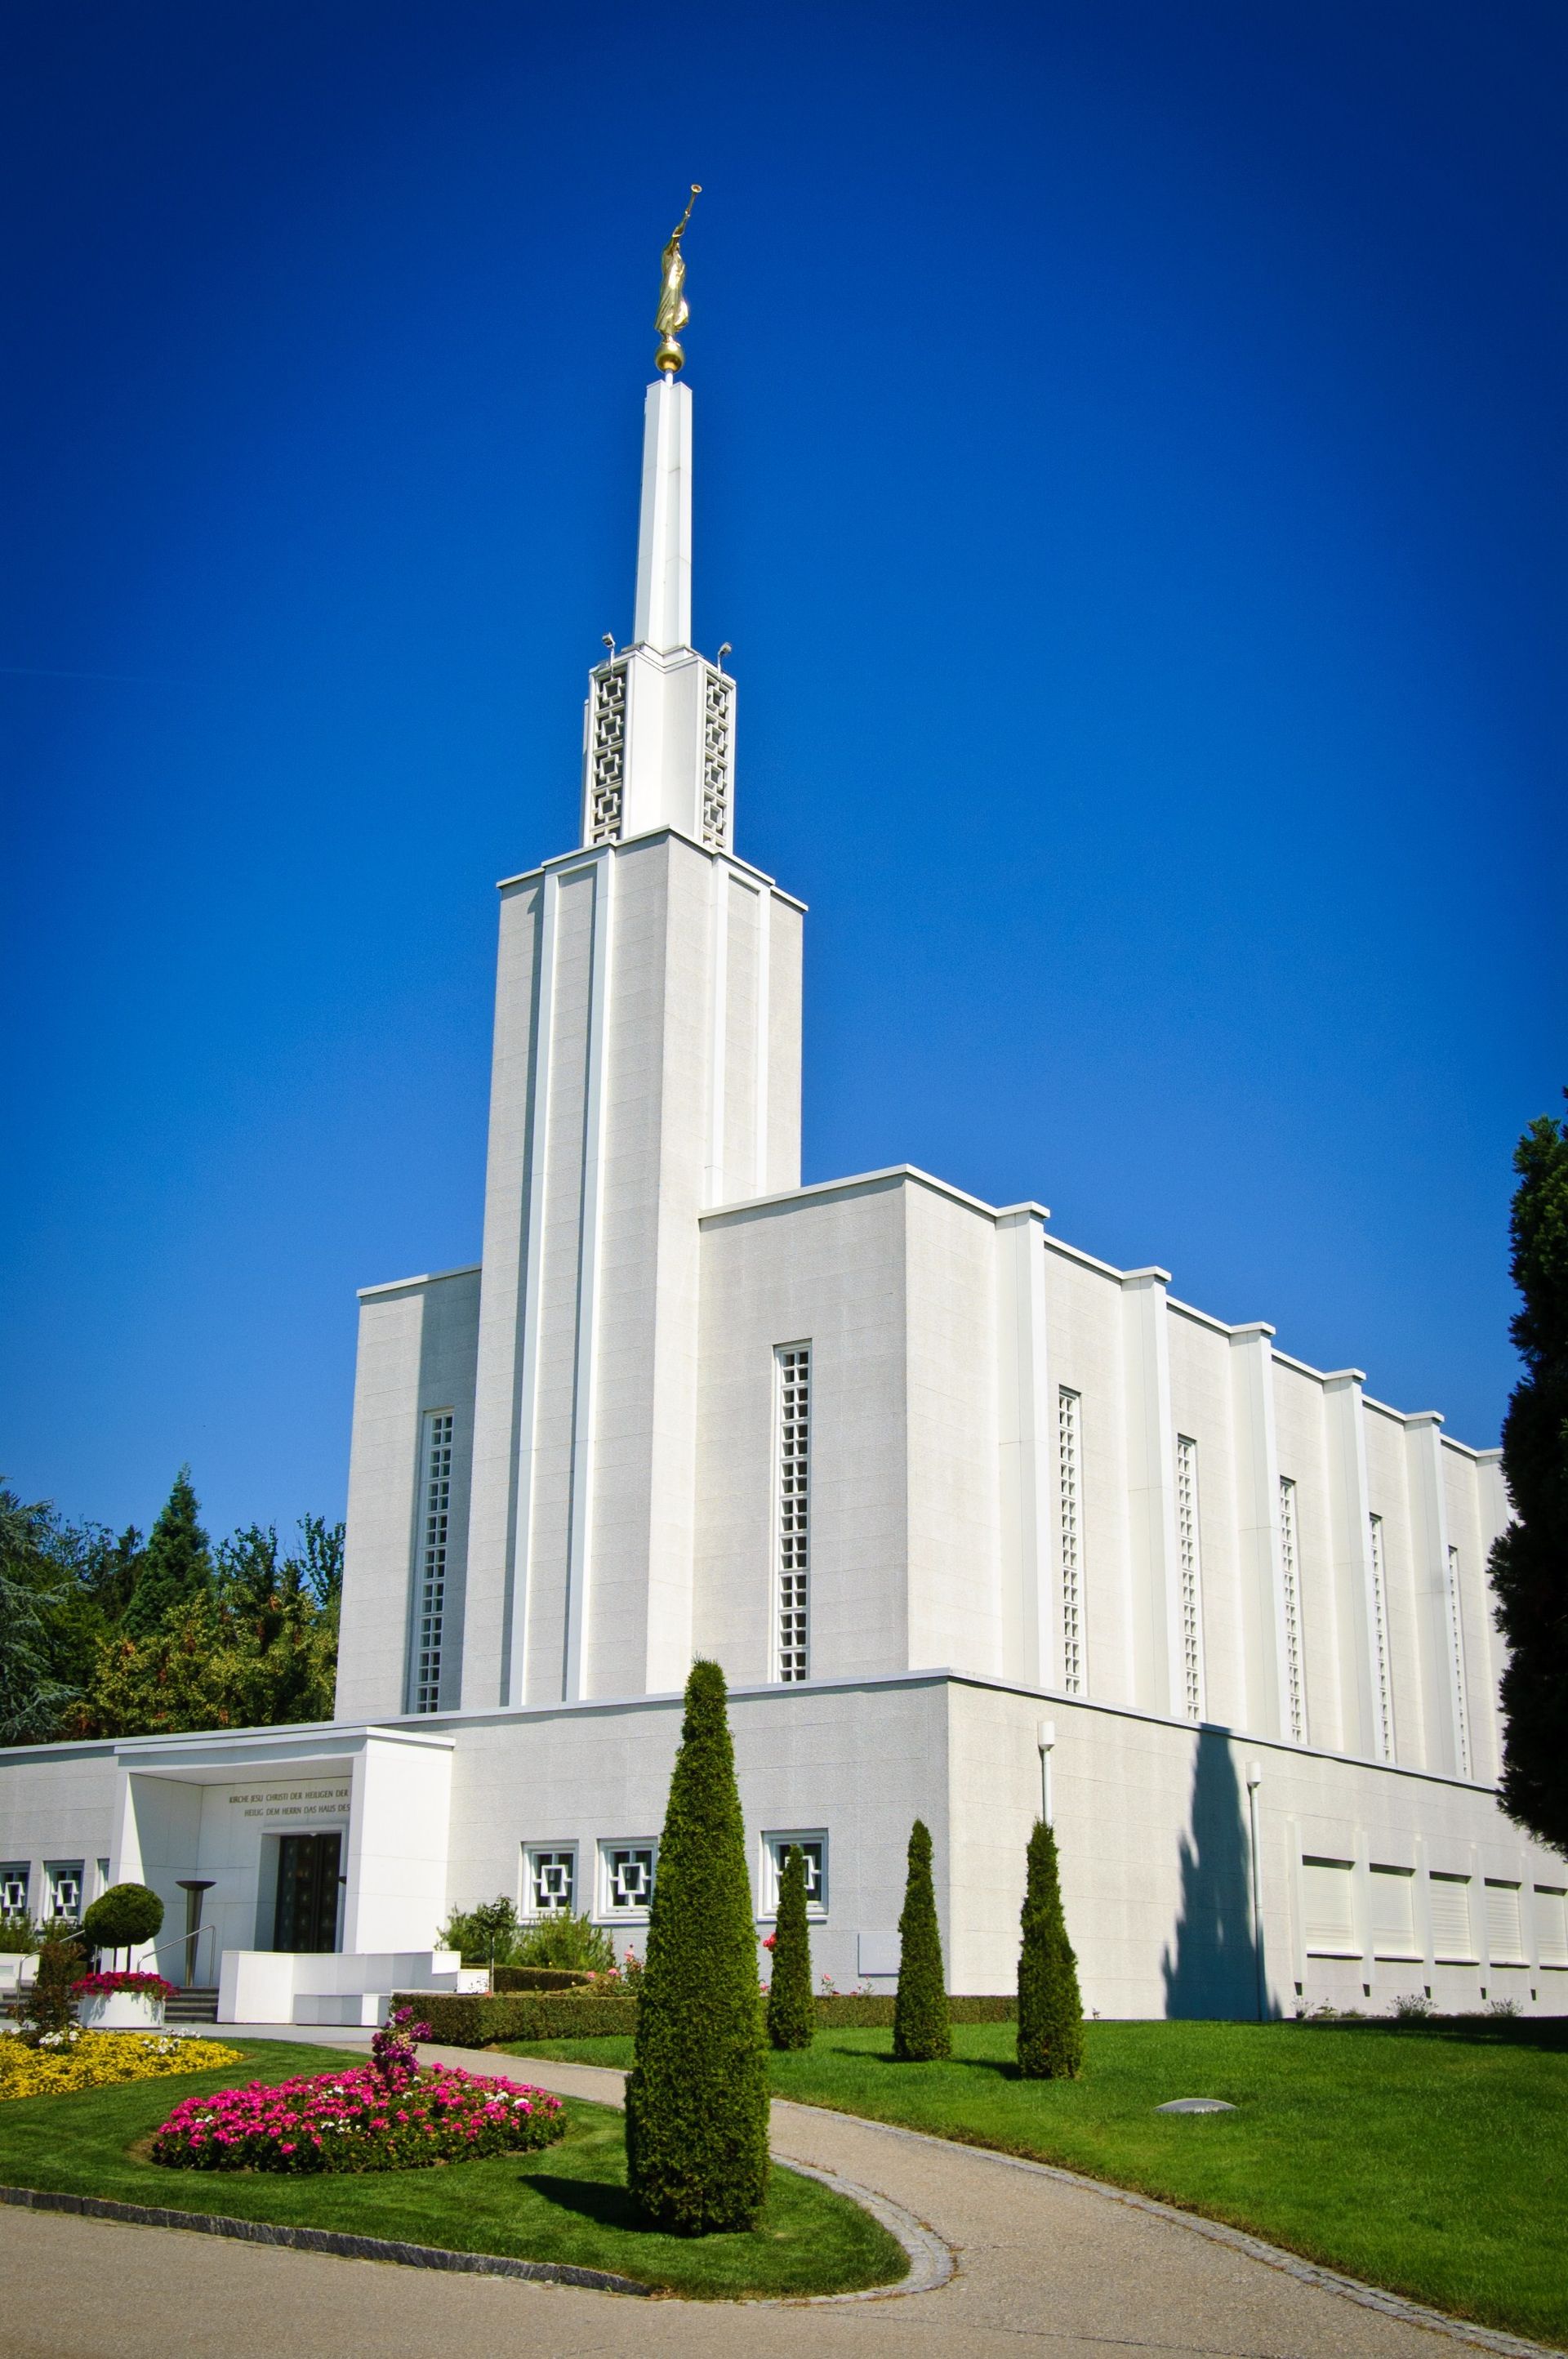 The entrance to the Bern Switzerland Temple welcomes members from several countries in Europe.